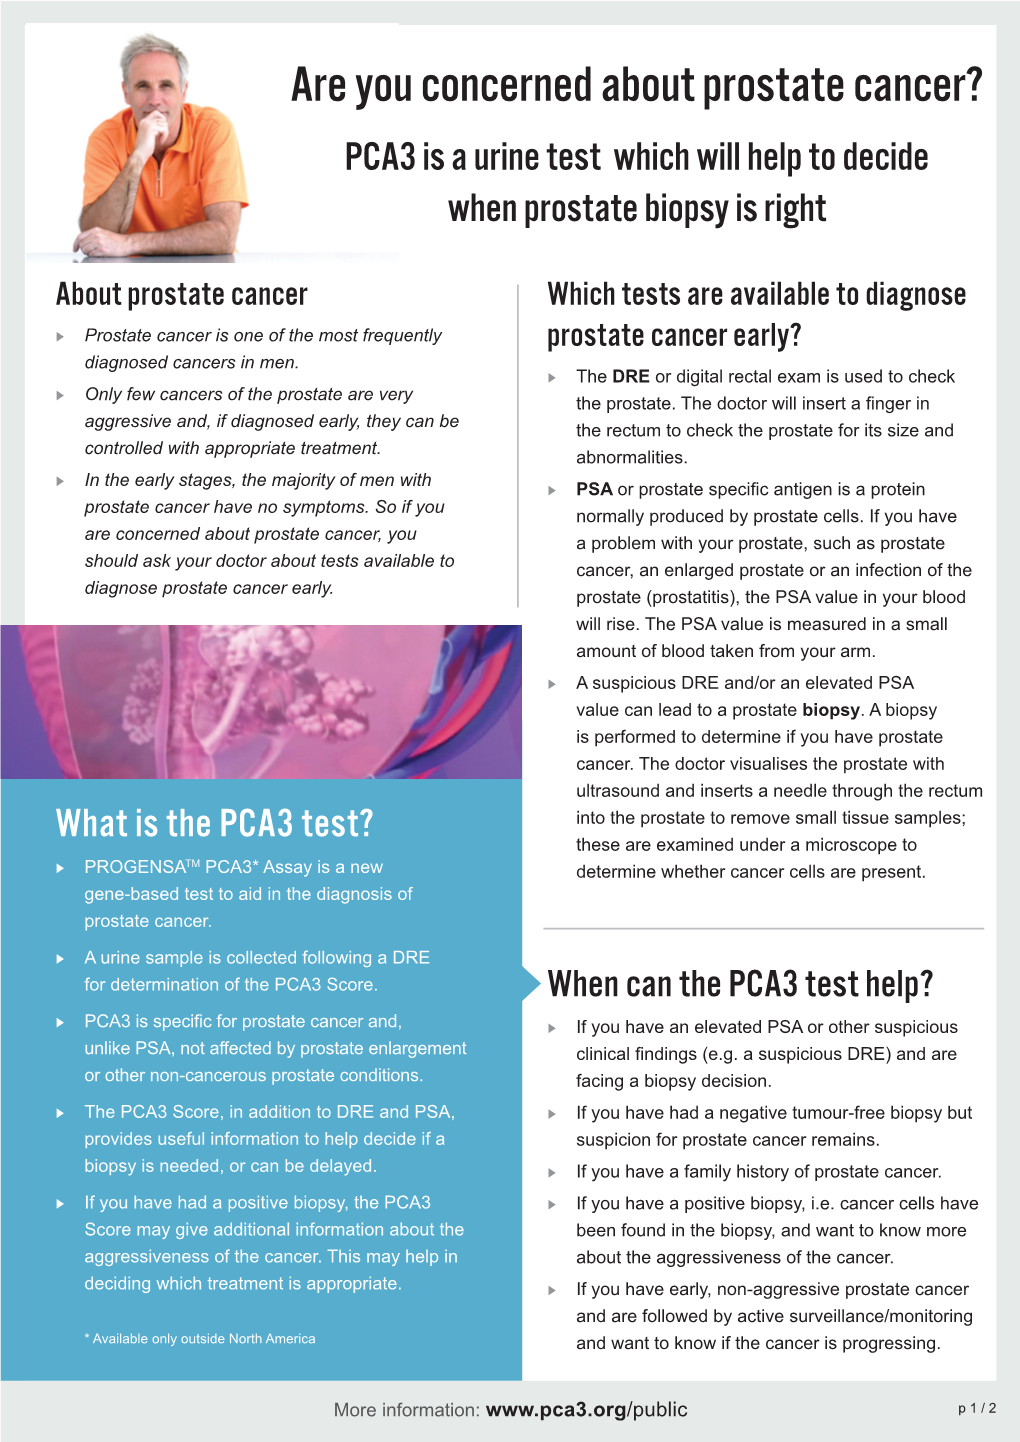 PCA3 Is a Urine Test Which Will Help to Decide When Prostate Biopsy Is Right